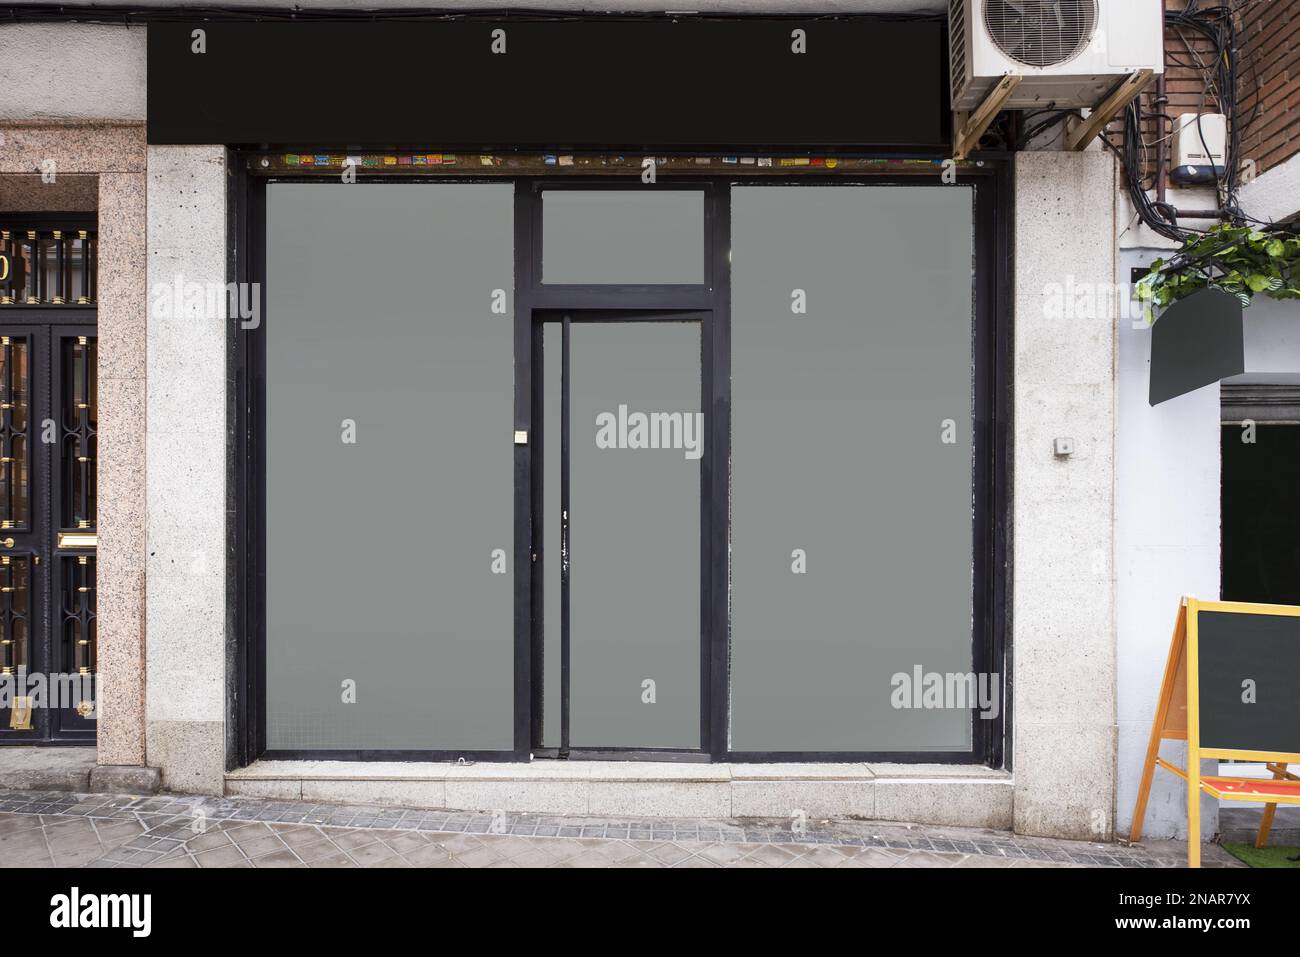 Front of a small street level shop with black metal trim and opaque glass surfaces Stock Photo